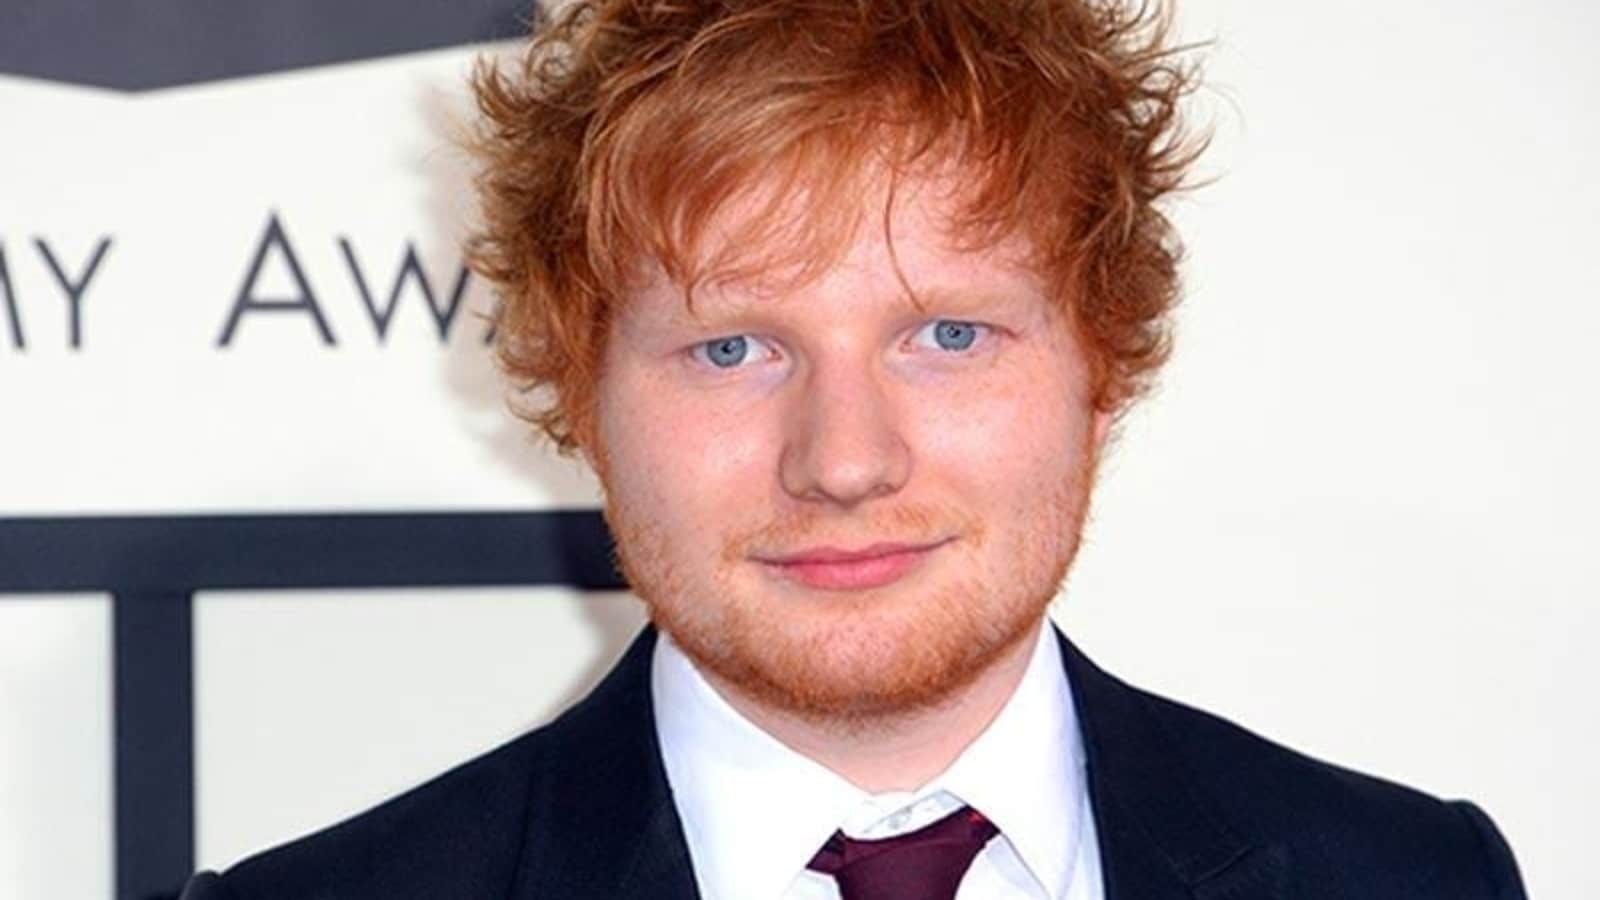 Ed Sheeran Tests Positive For Covid 19: 'Apologies To Anyone I've Let Down'